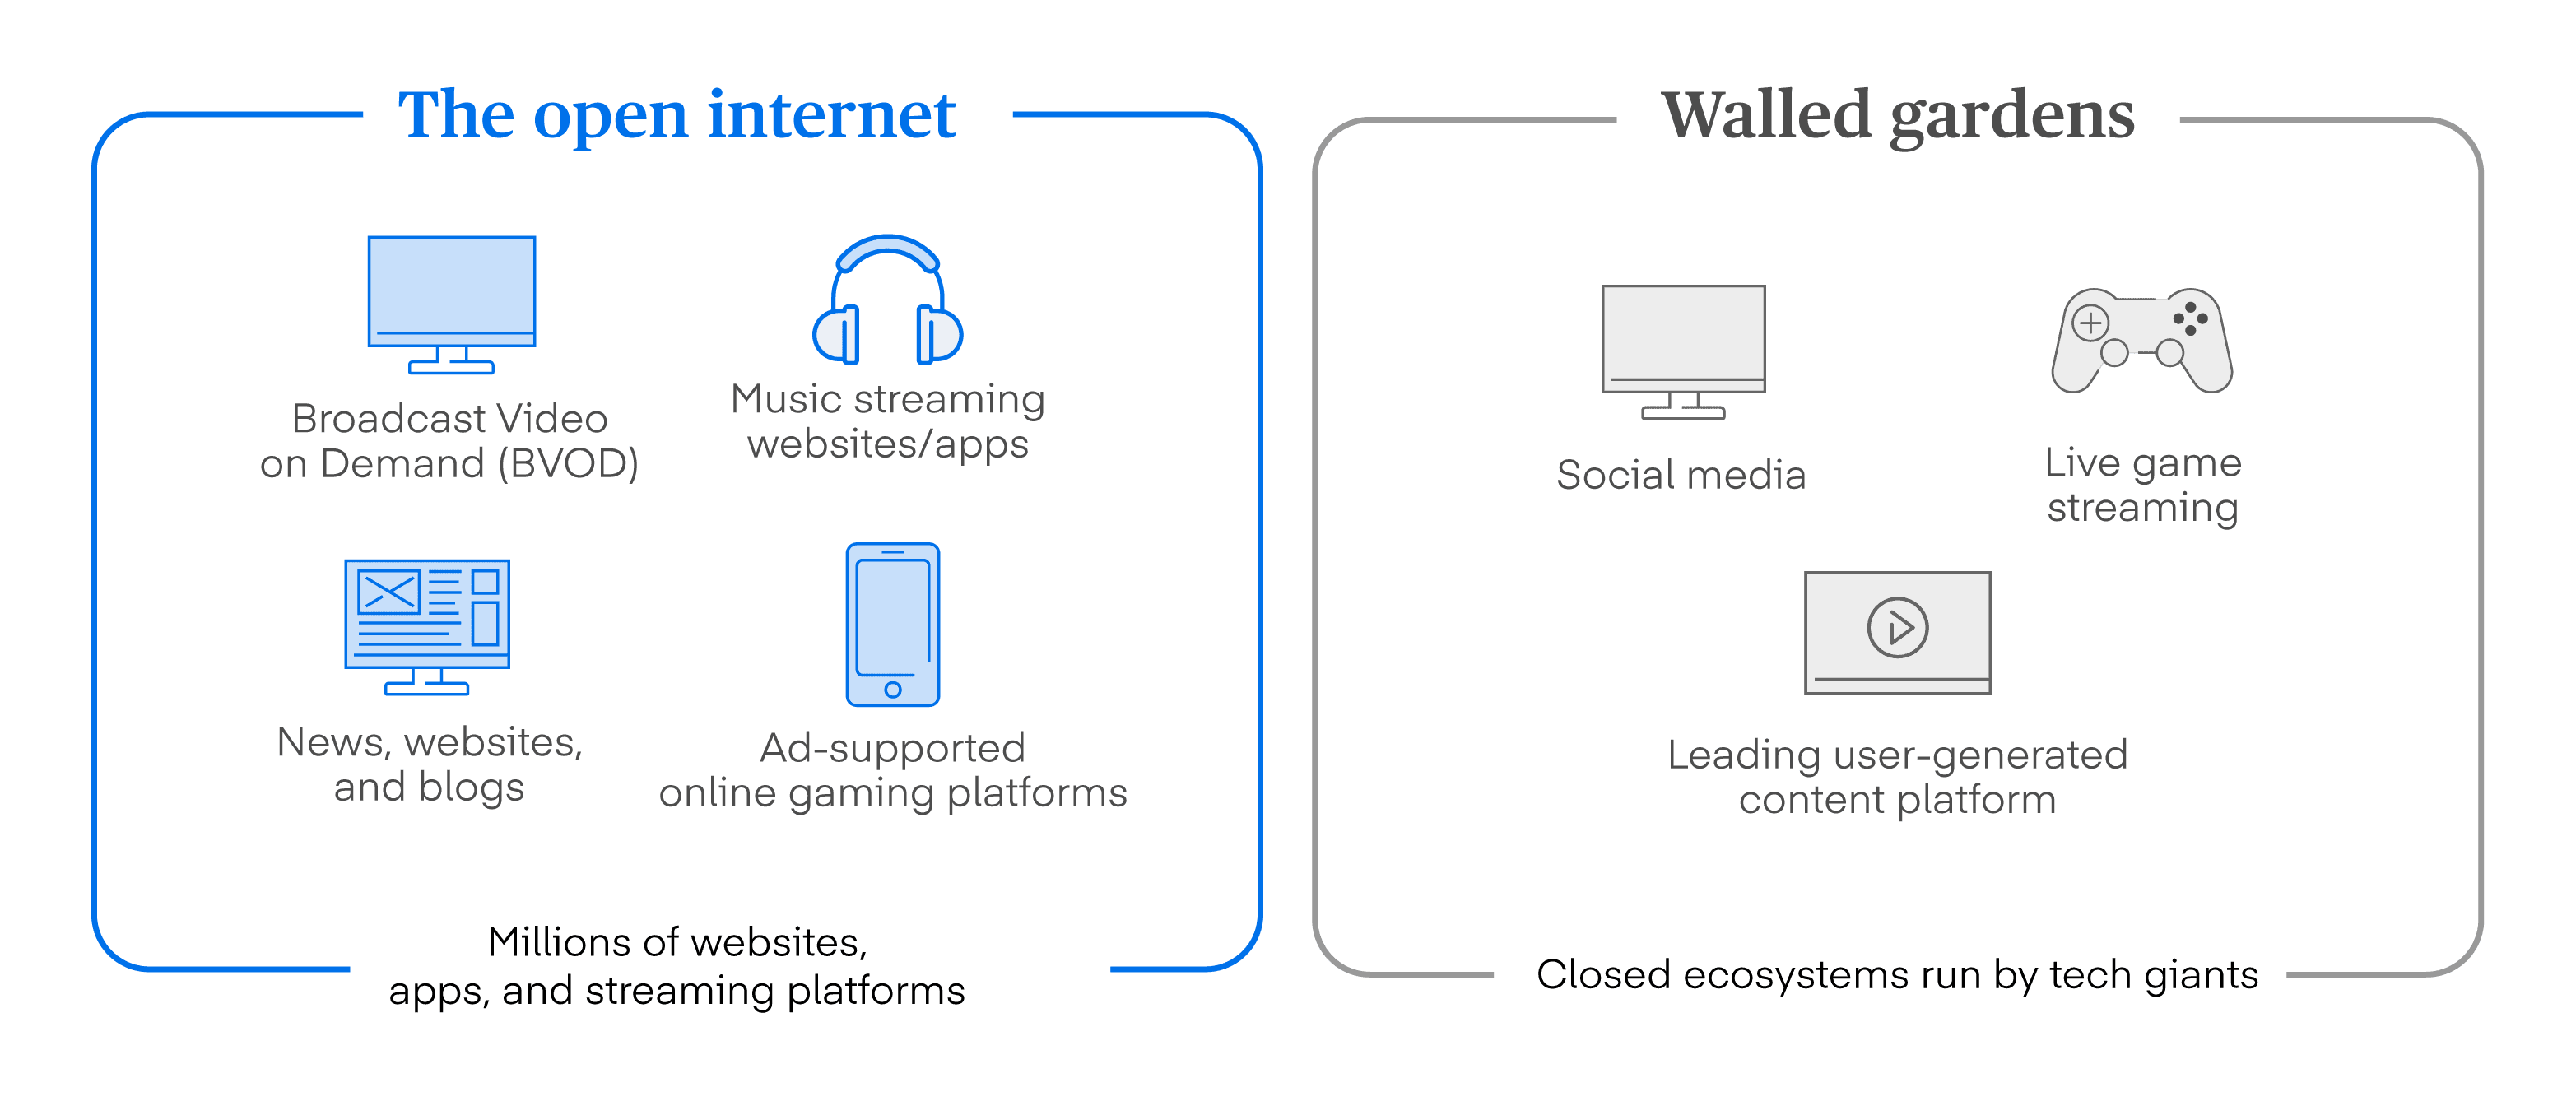 Infographic displaying The Open Internet vs Walled Gardens with device types